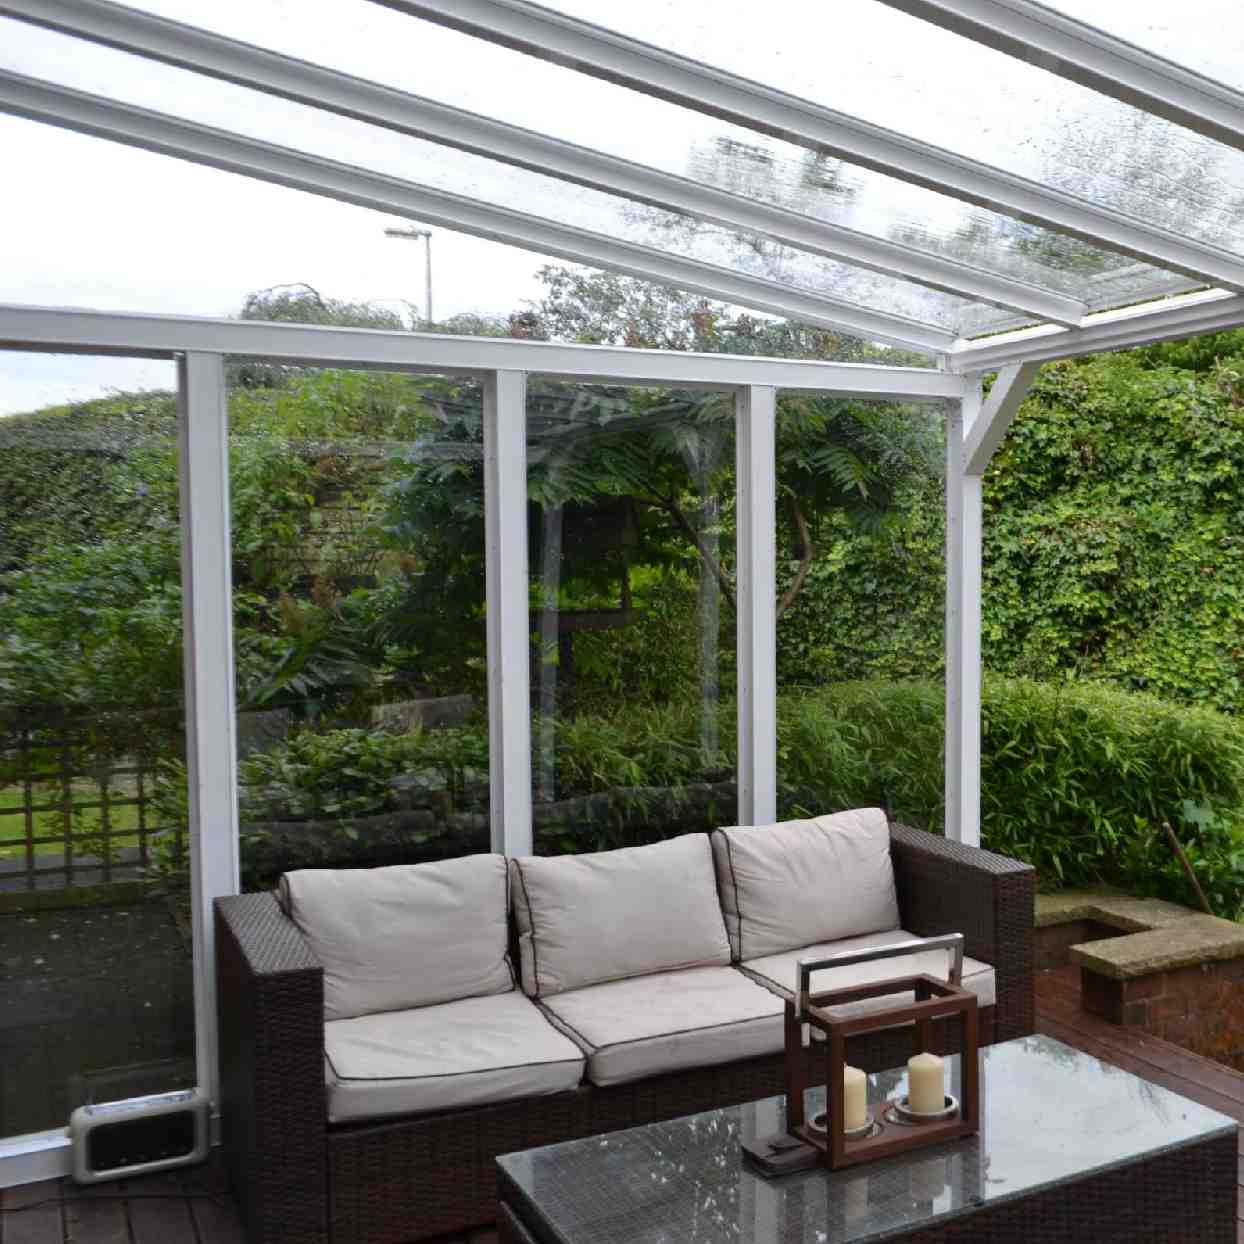 Buy Omega Verandah White with 6mm Glass Clear Plate Polycarbonate Glazing - 10.5m (W) x 1.5m (P), (5) Supporting Posts online today